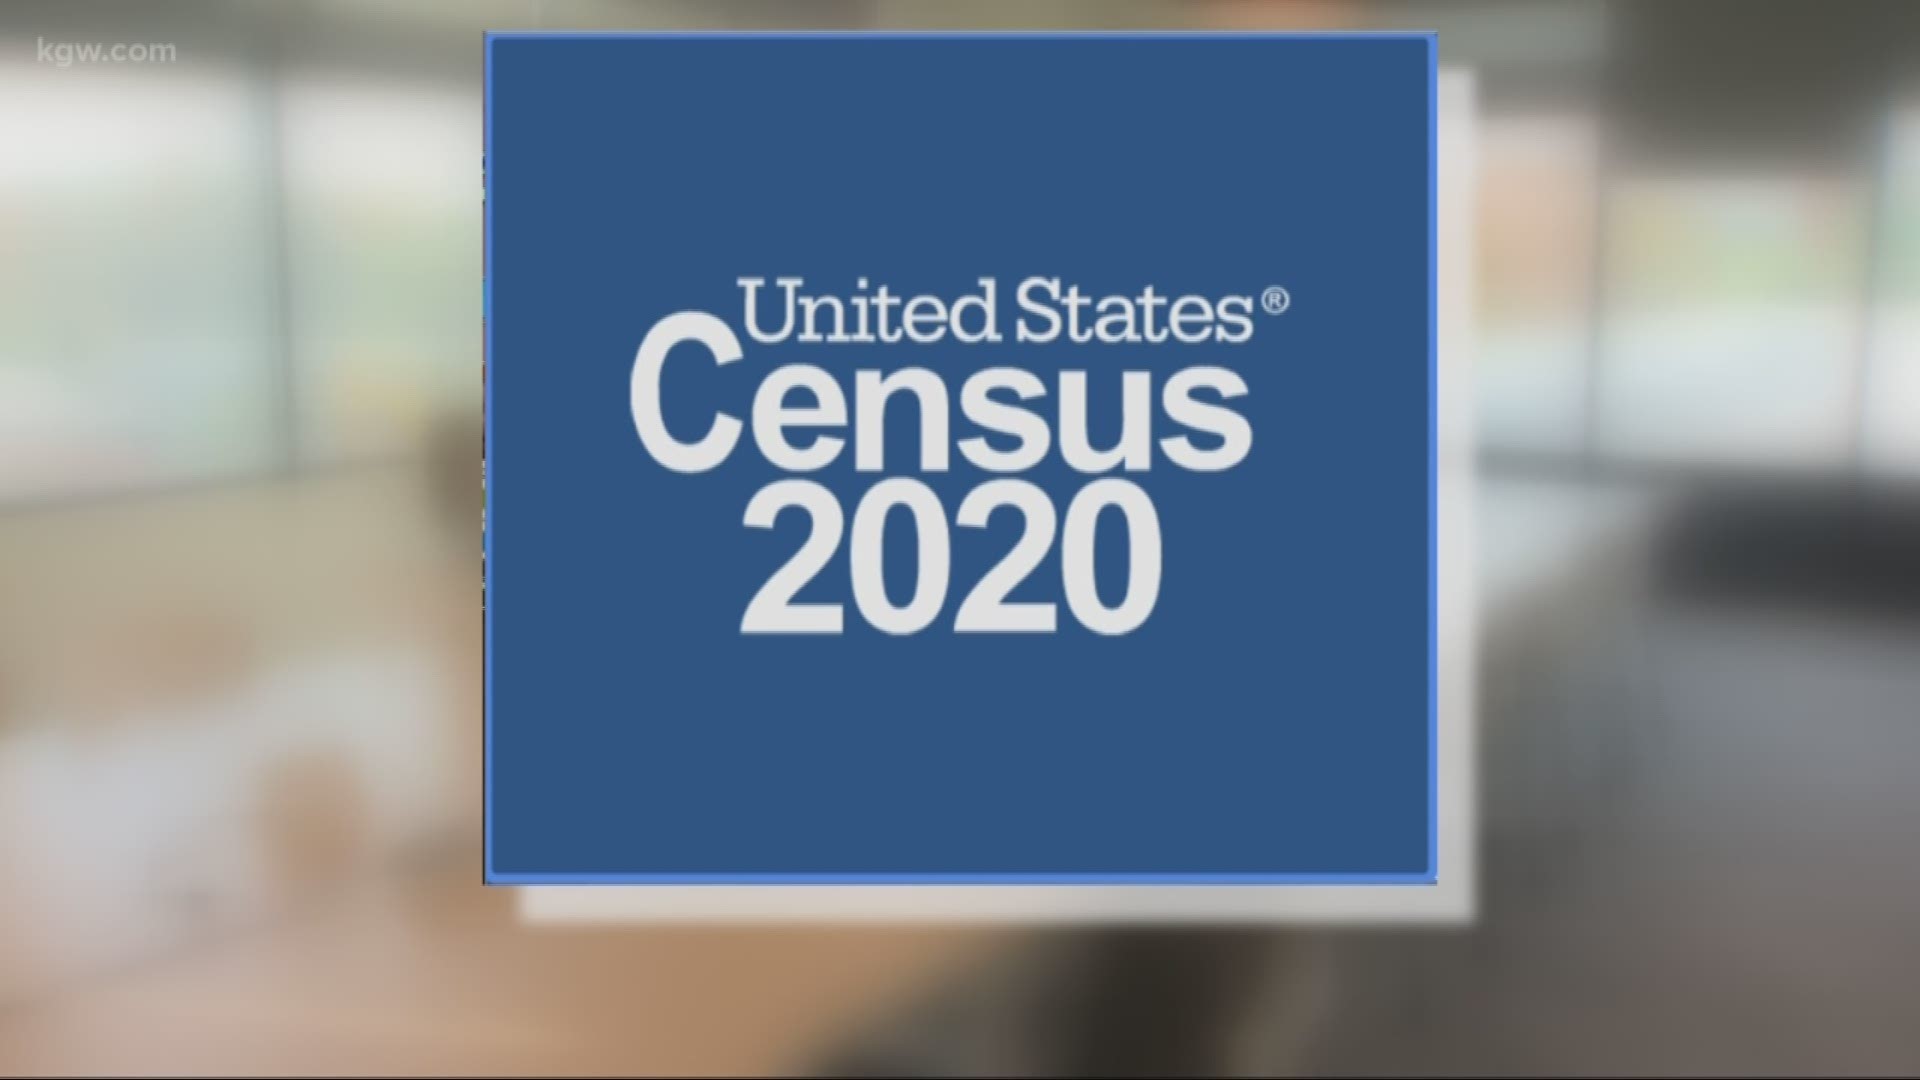 The census bureau needs help reaching hard-to-count populations.